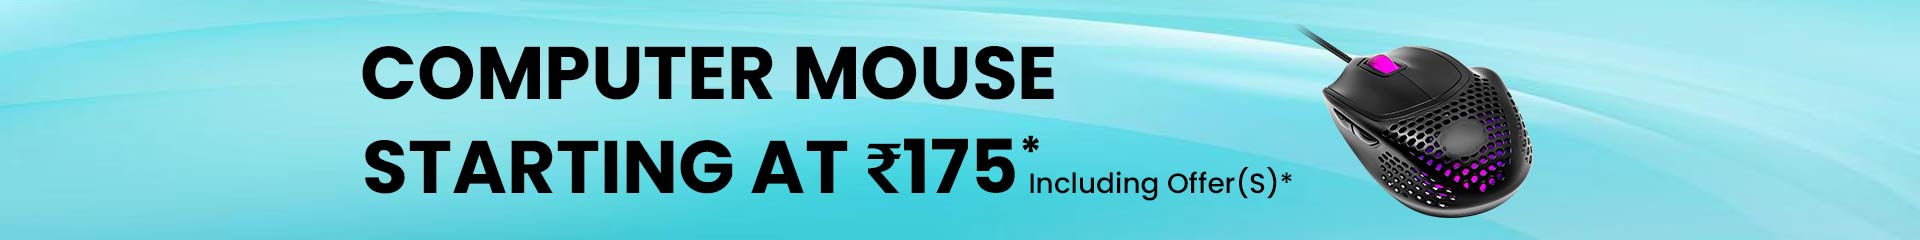 Mouse starting at rs 175 category banner